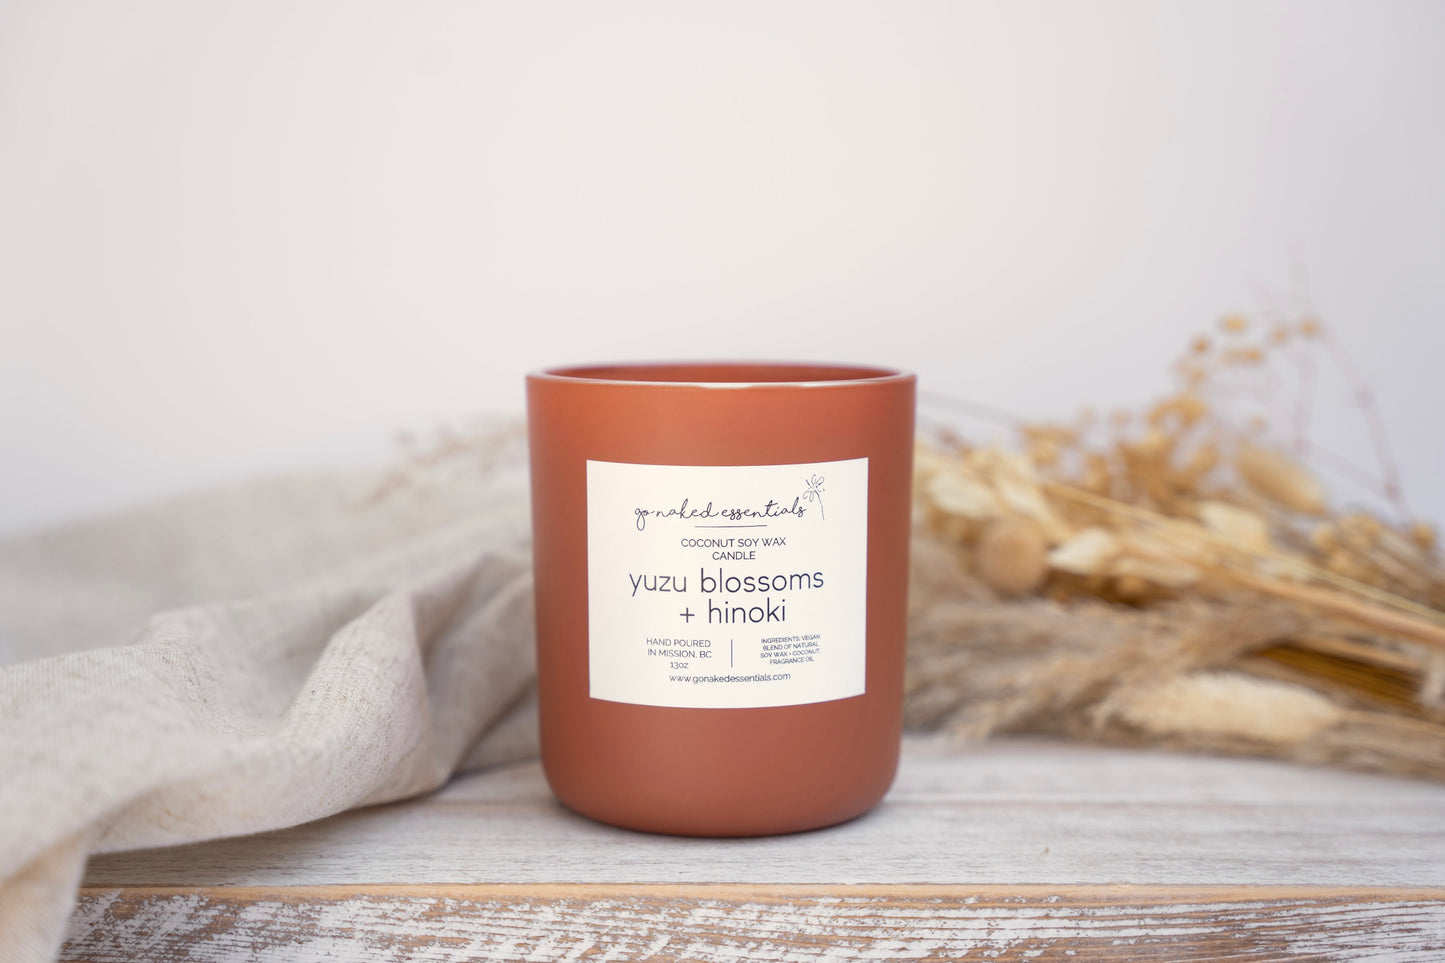 Yuzu Blossoms + Hinoki Coconut Soy Candle